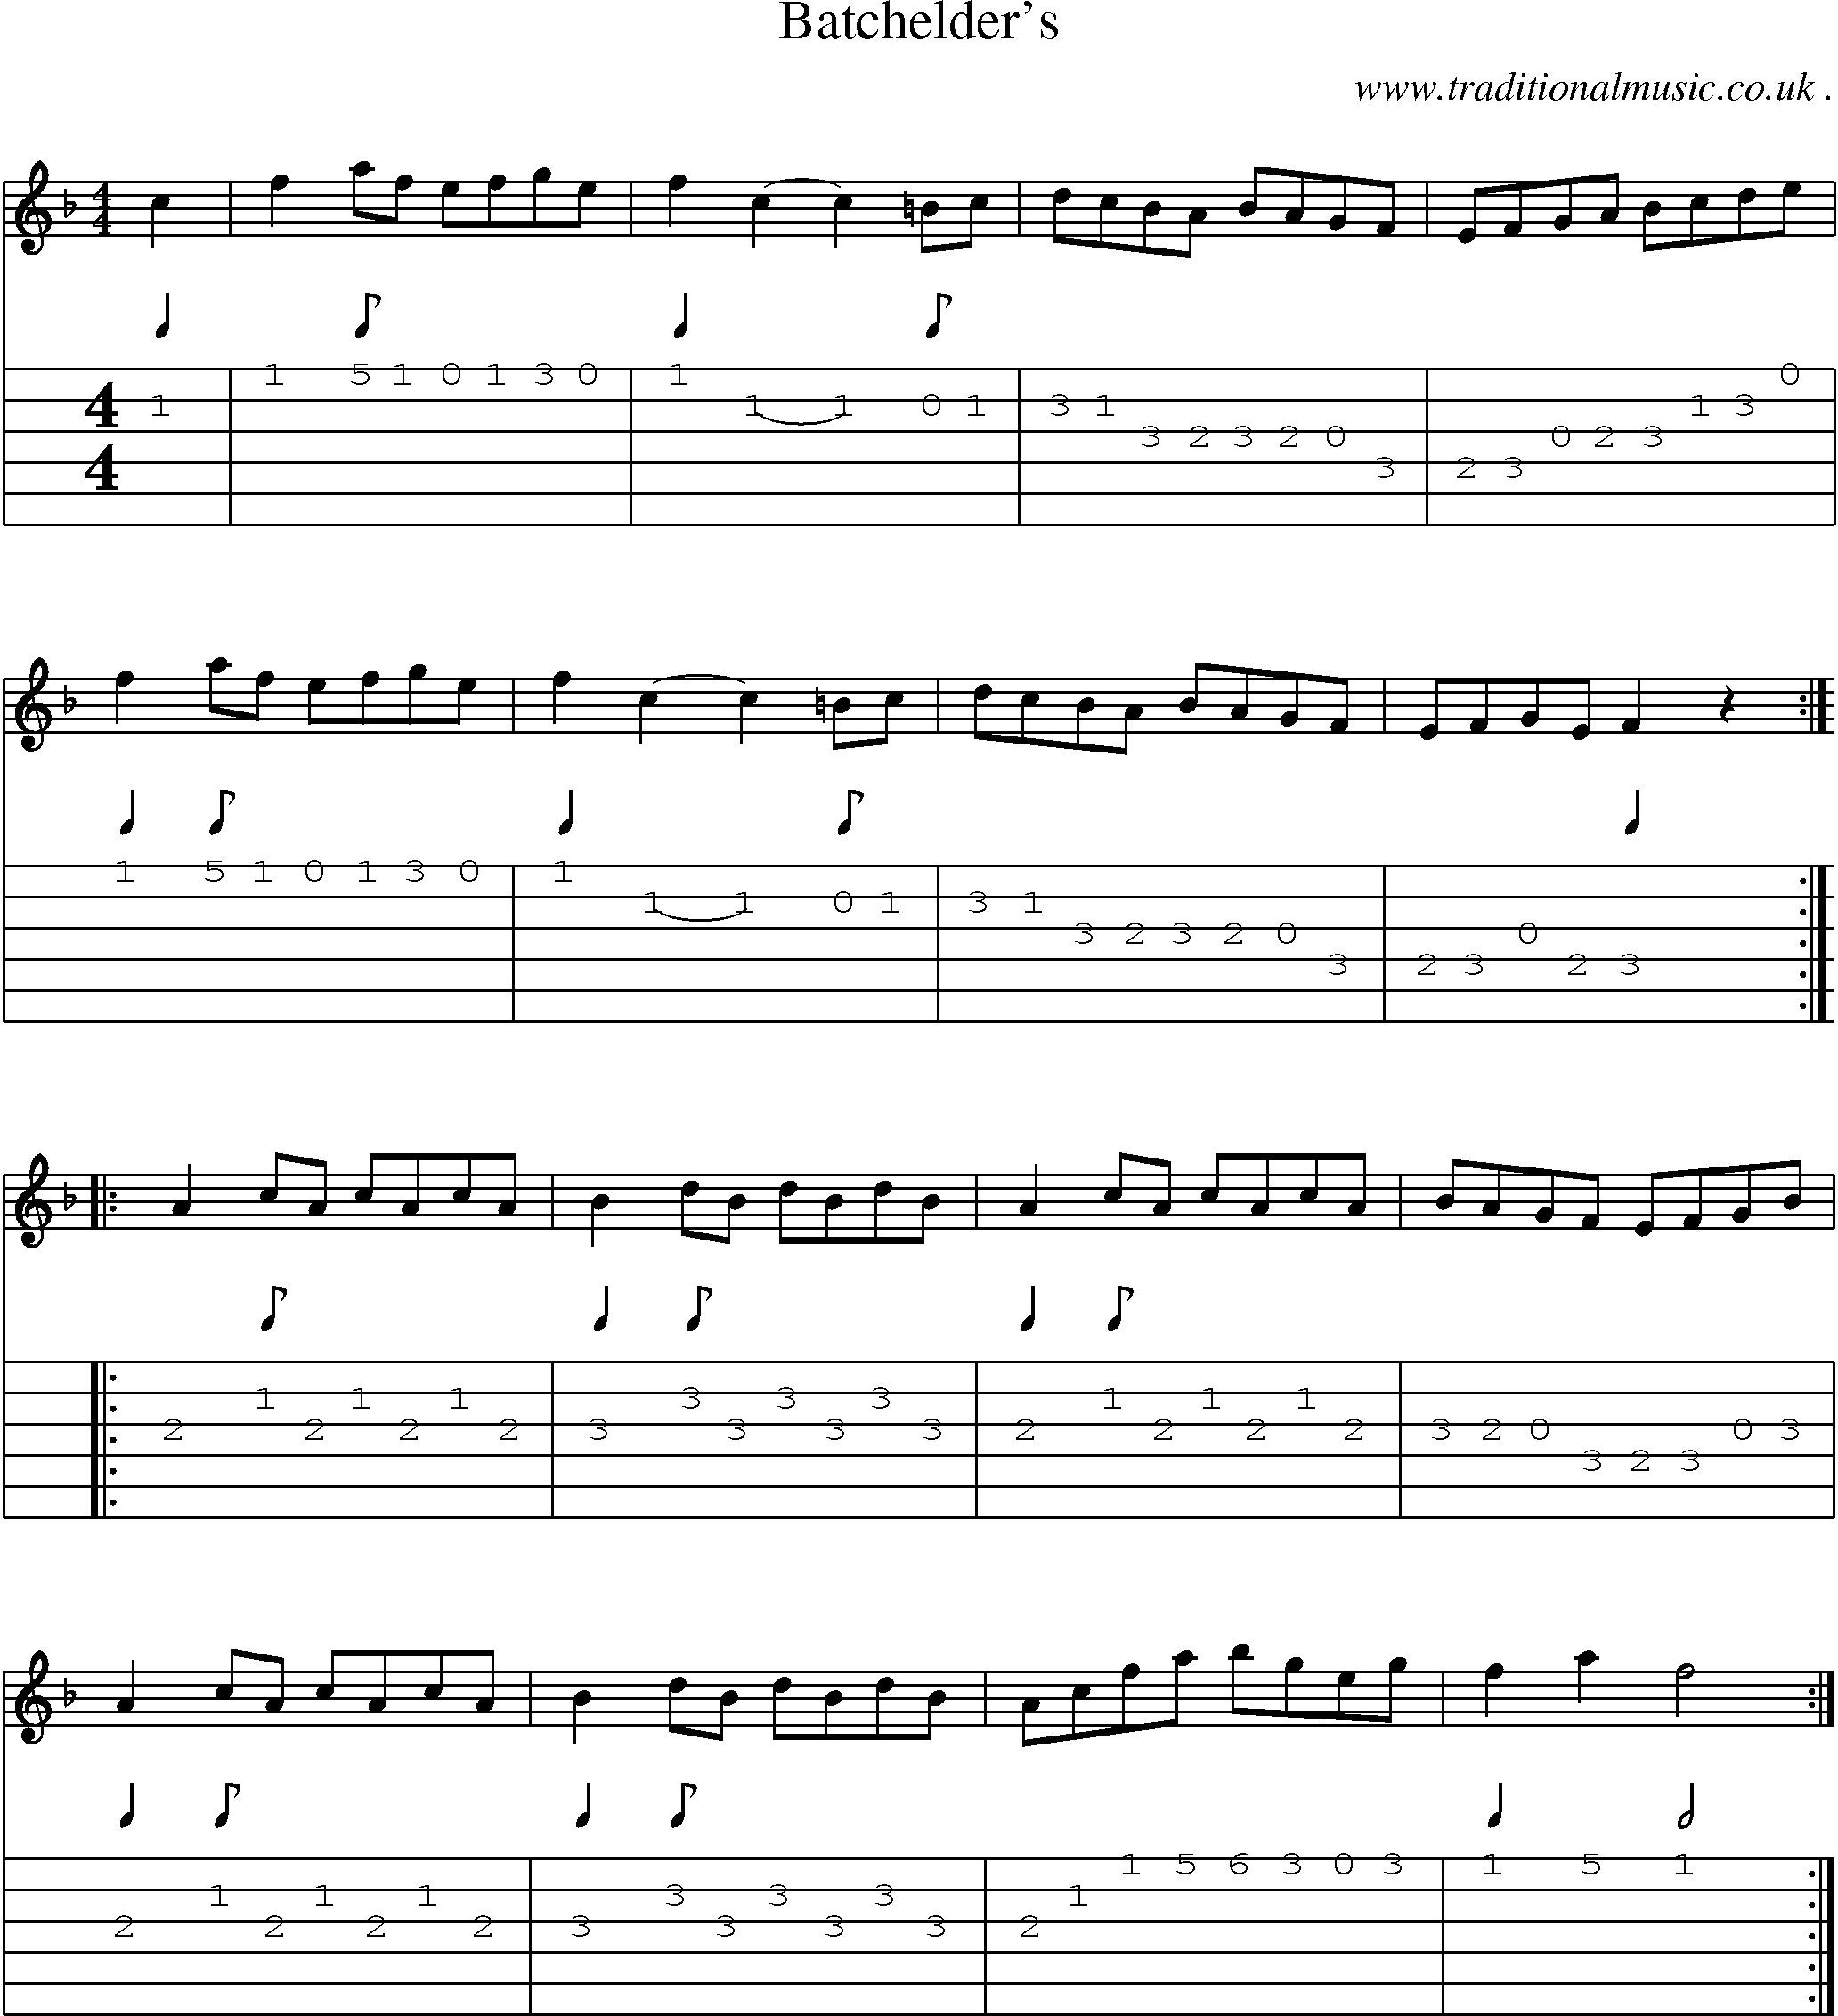 Sheet-Music and Guitar Tabs for Batchelders